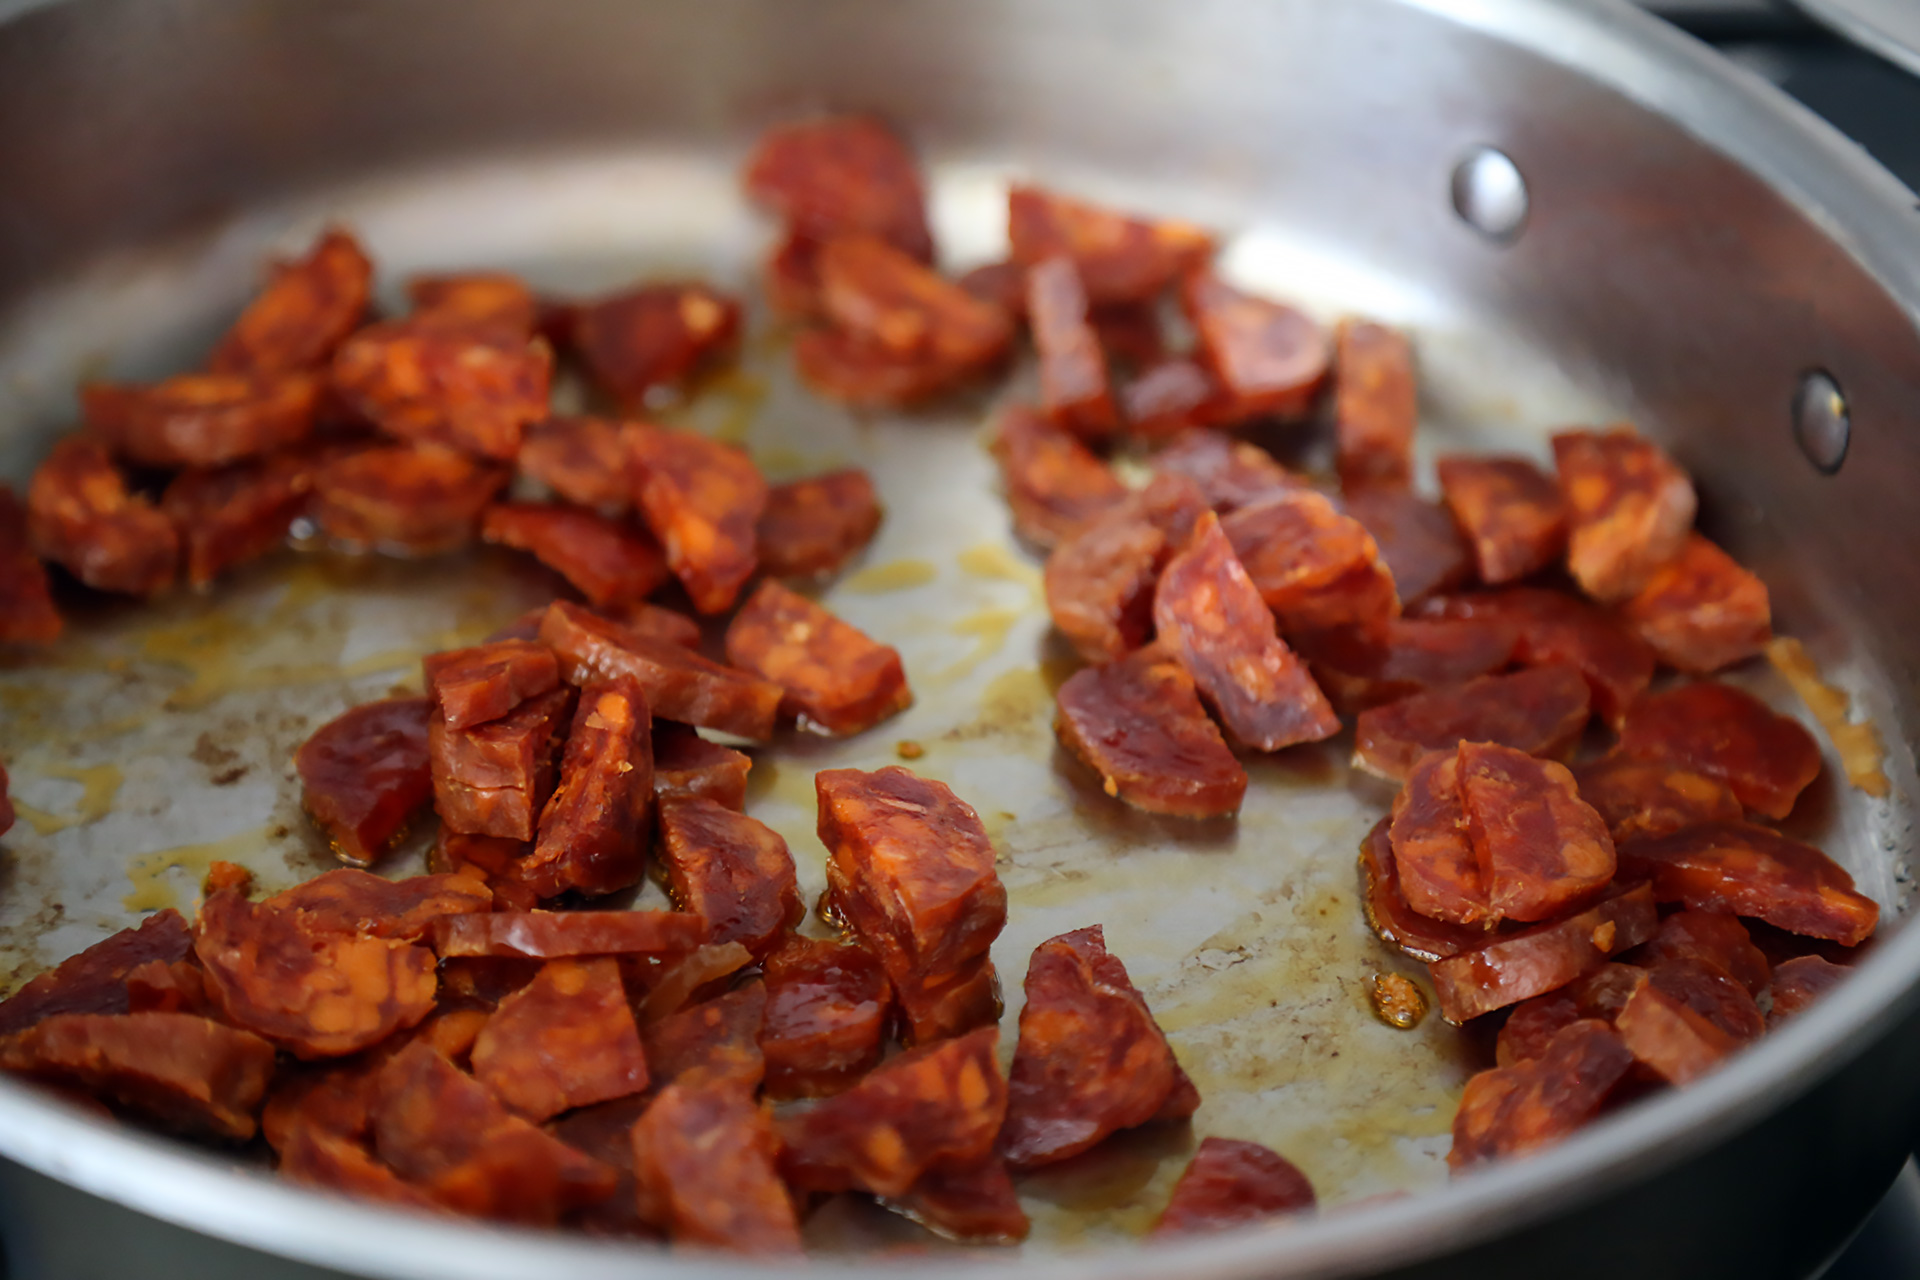 Add the chorizo, reduce the heat to medium-low and cook until lightly browned, about 3 minutes.